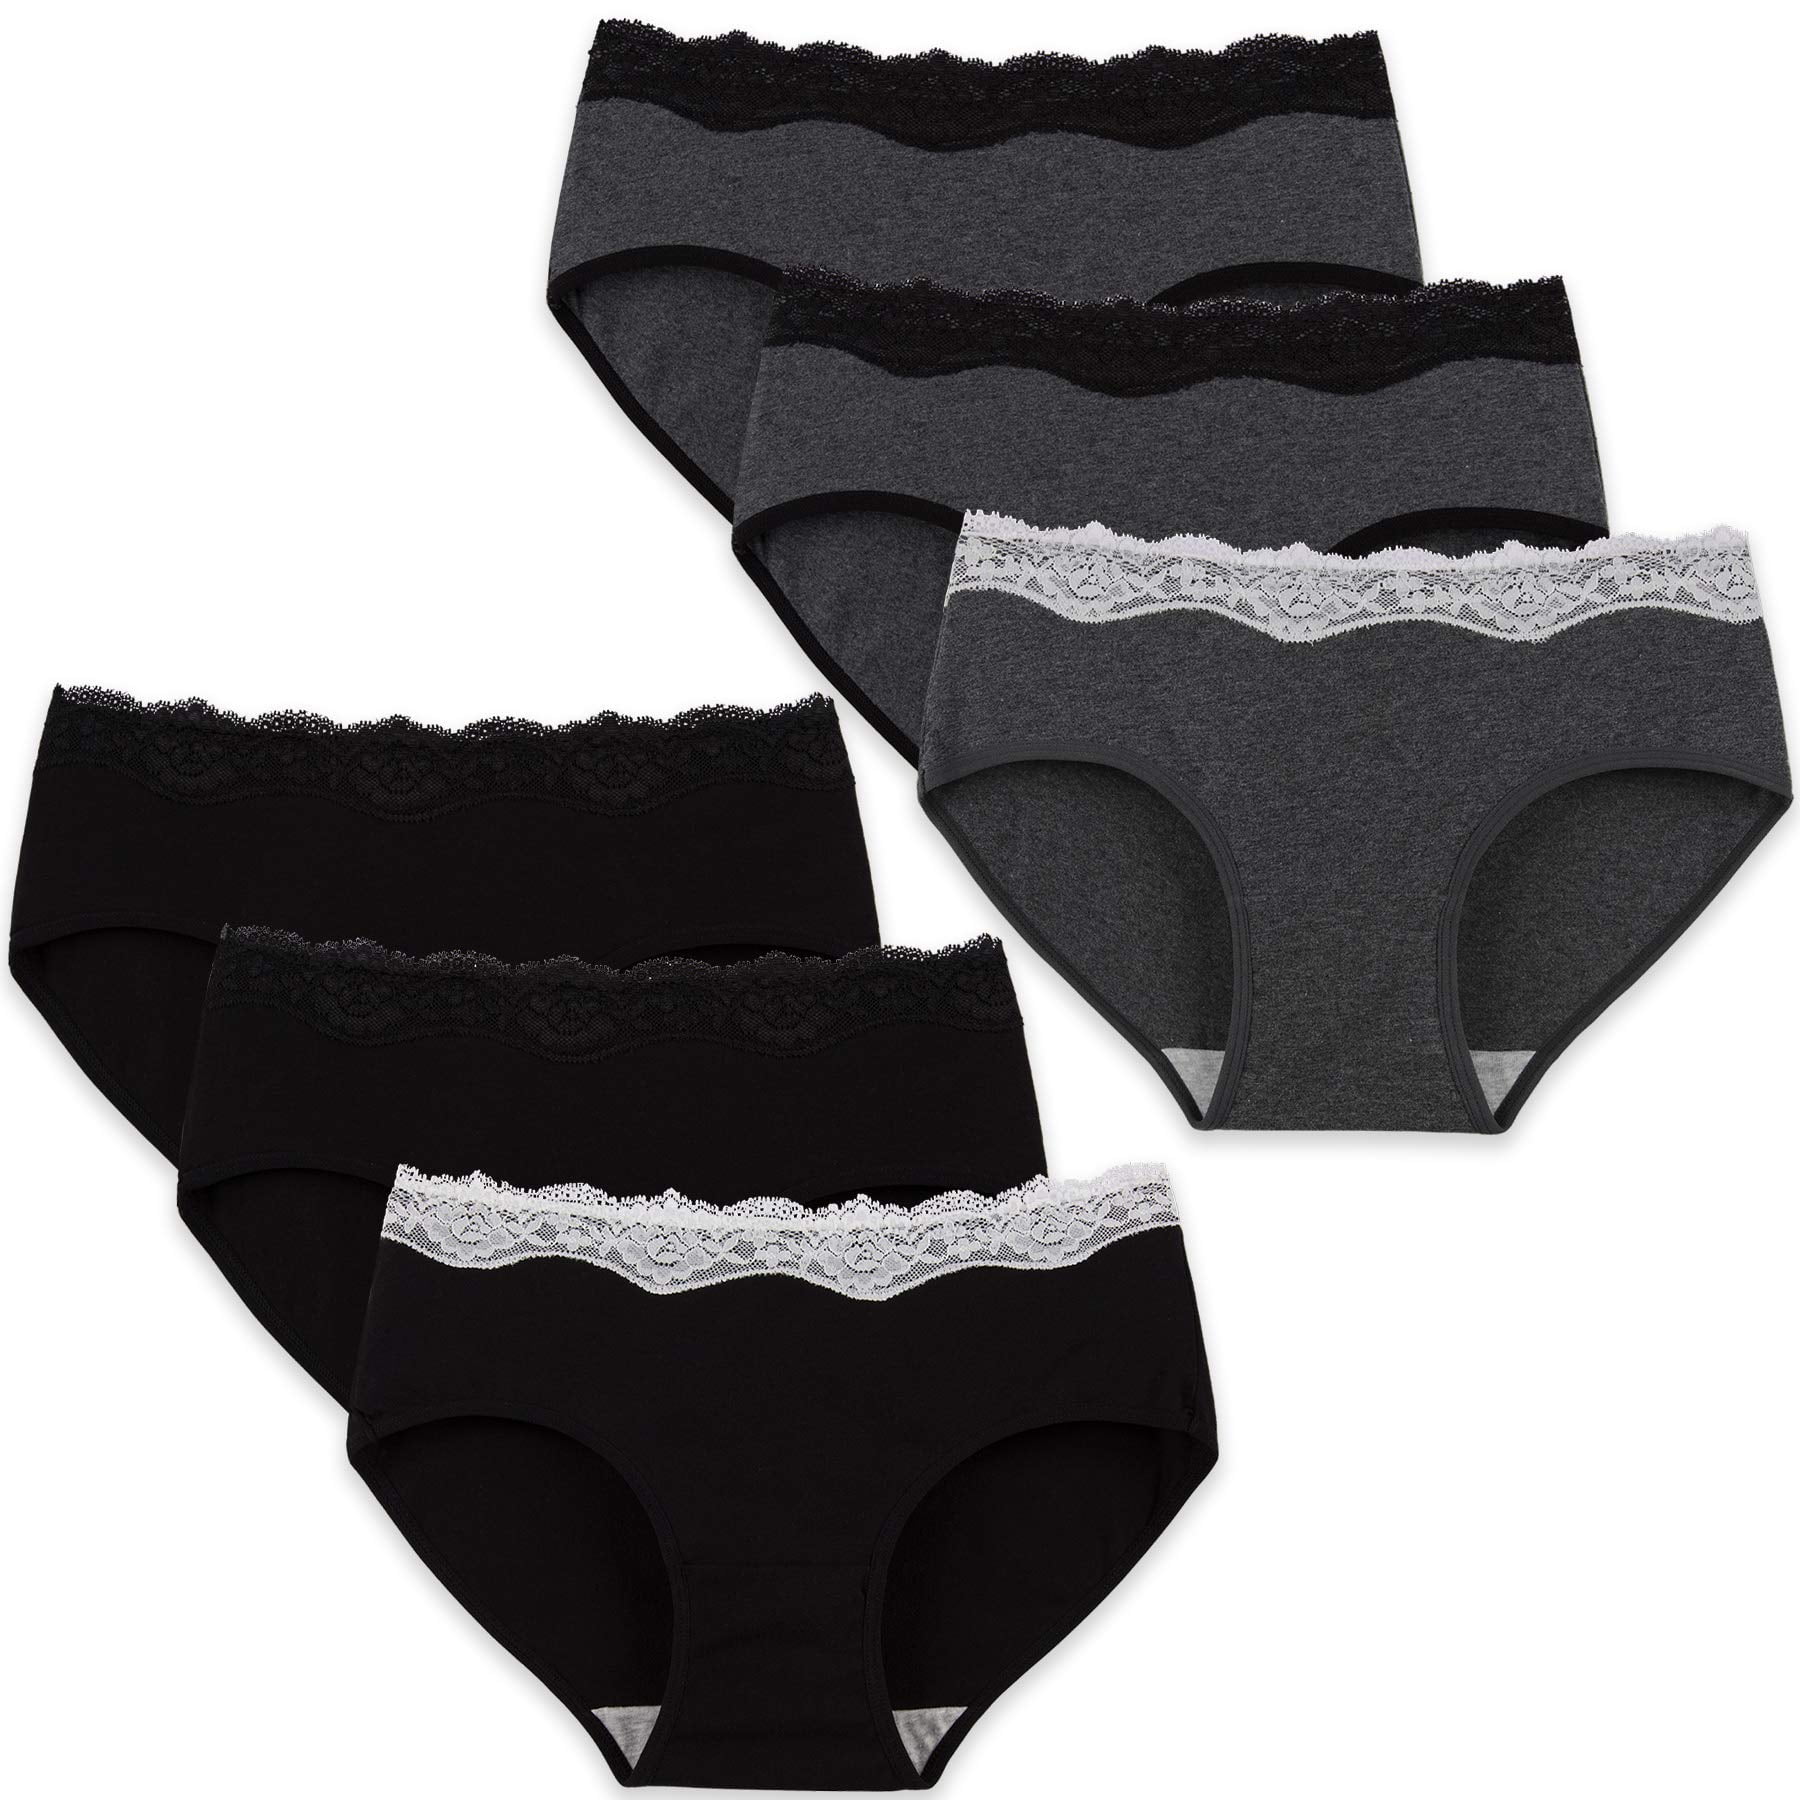 INNERSY Womens Lace Underwear Cotton Hipster Panties Soft Lace Underwear  Pack of 6 (S, Black) 